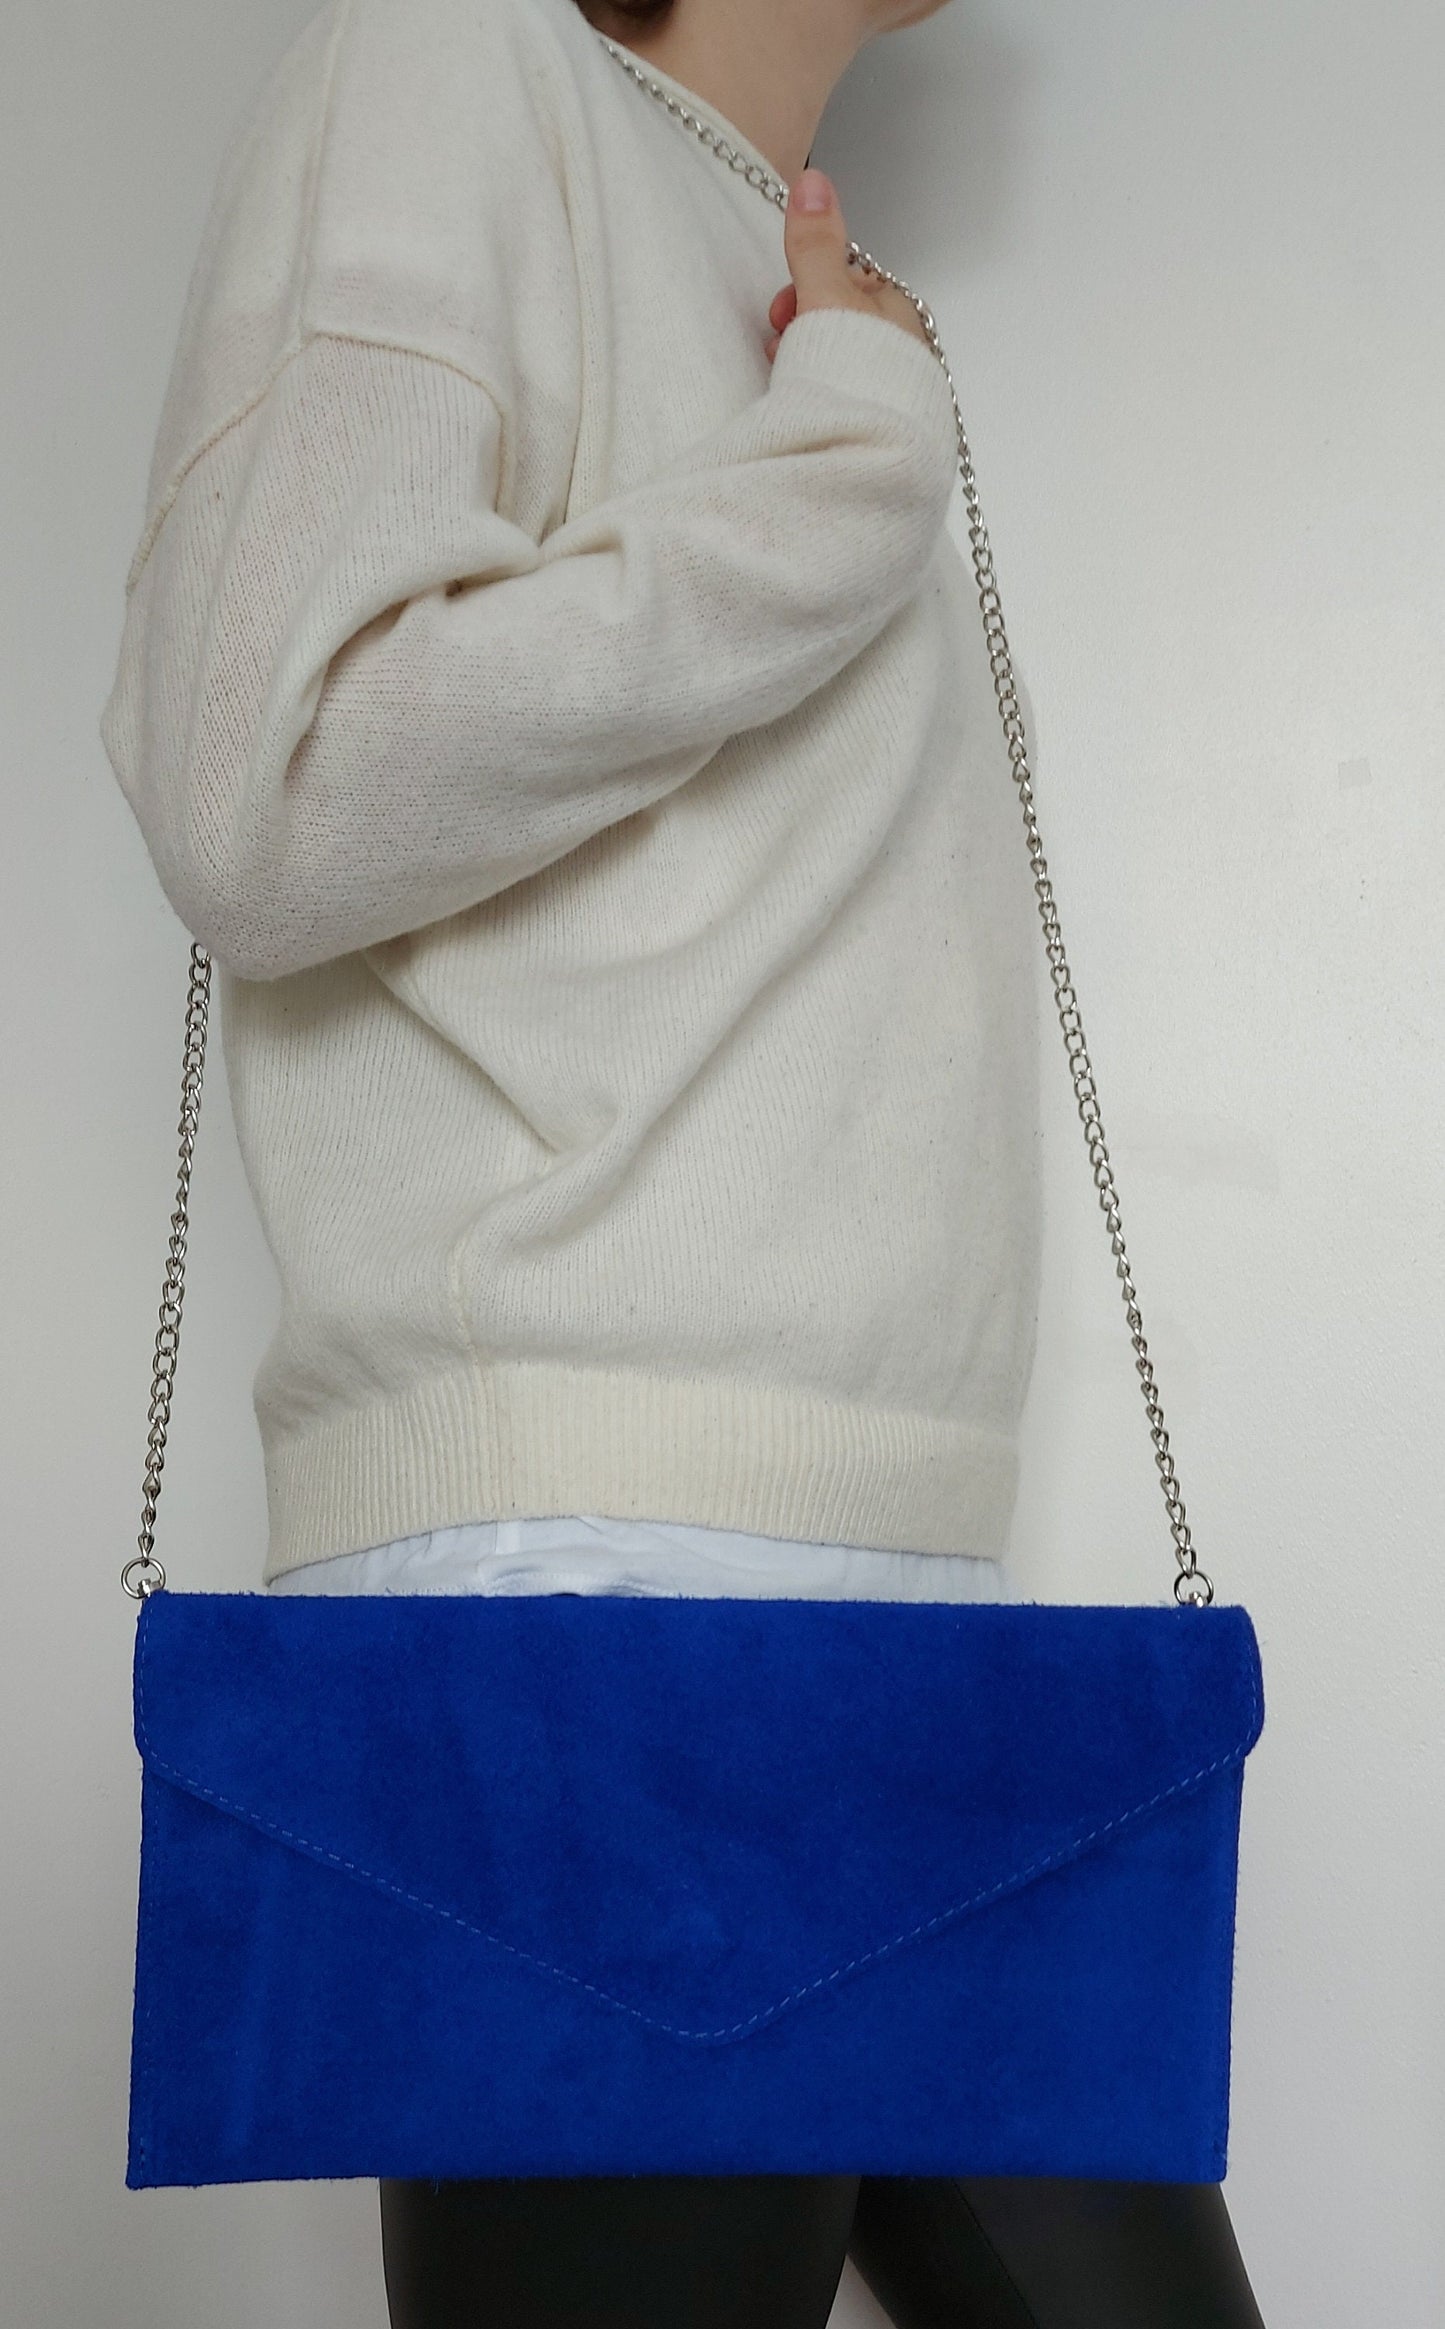 Royal Blue Envelope Clutch Bag with chain strap